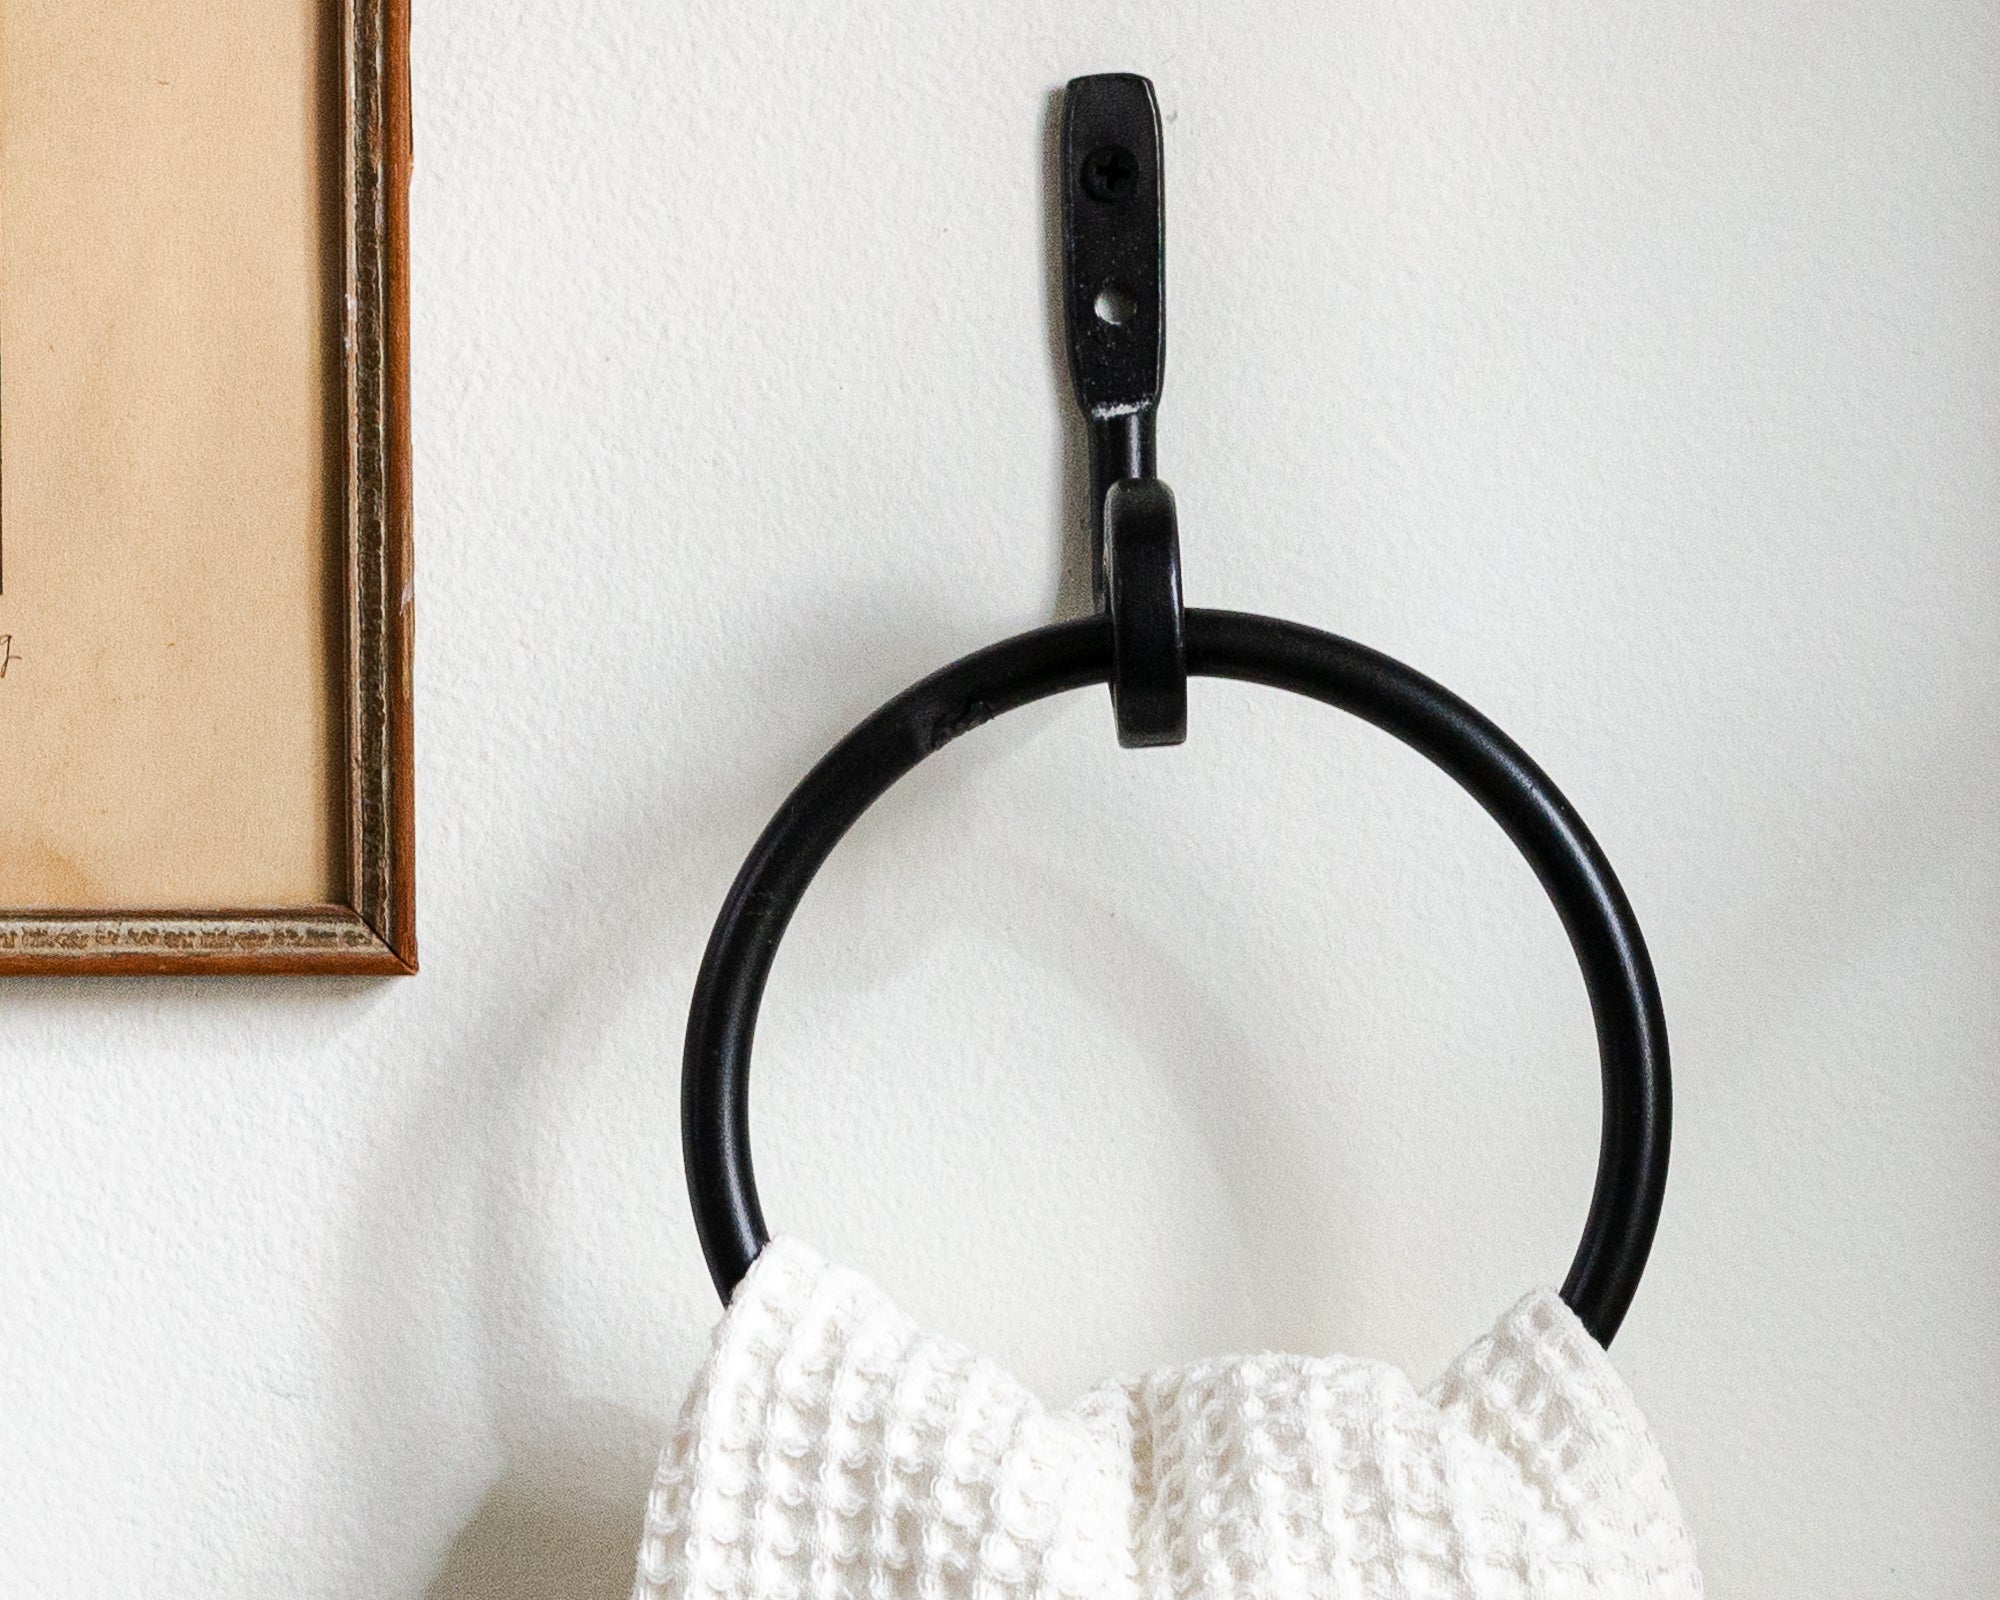 The Towel Ring